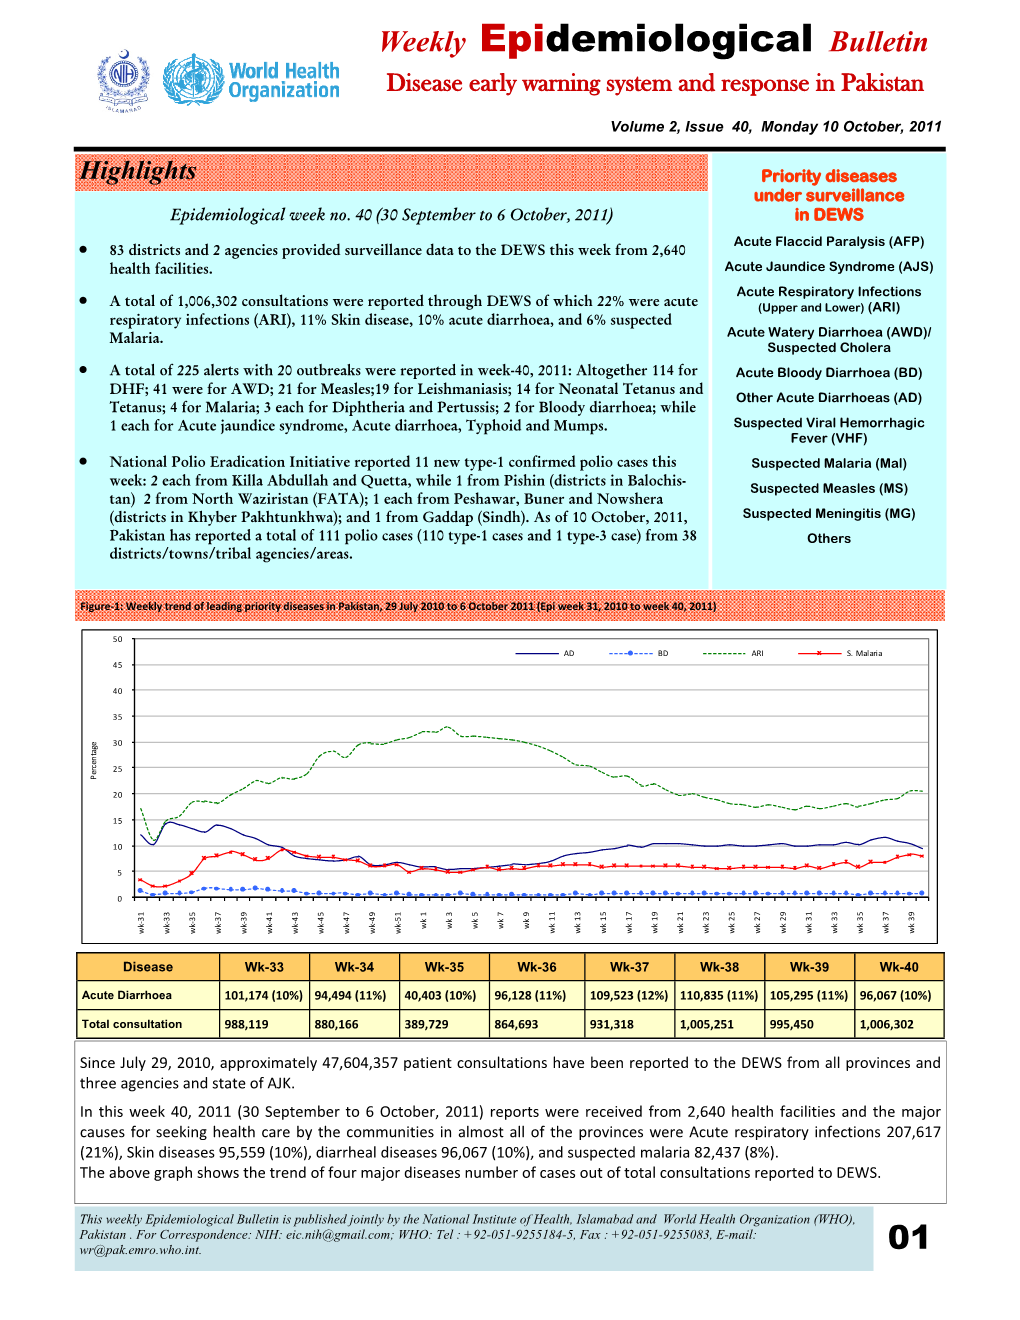 Weekly Epidemiological Bulletin Disease Early Warning System and Response in Pakistan